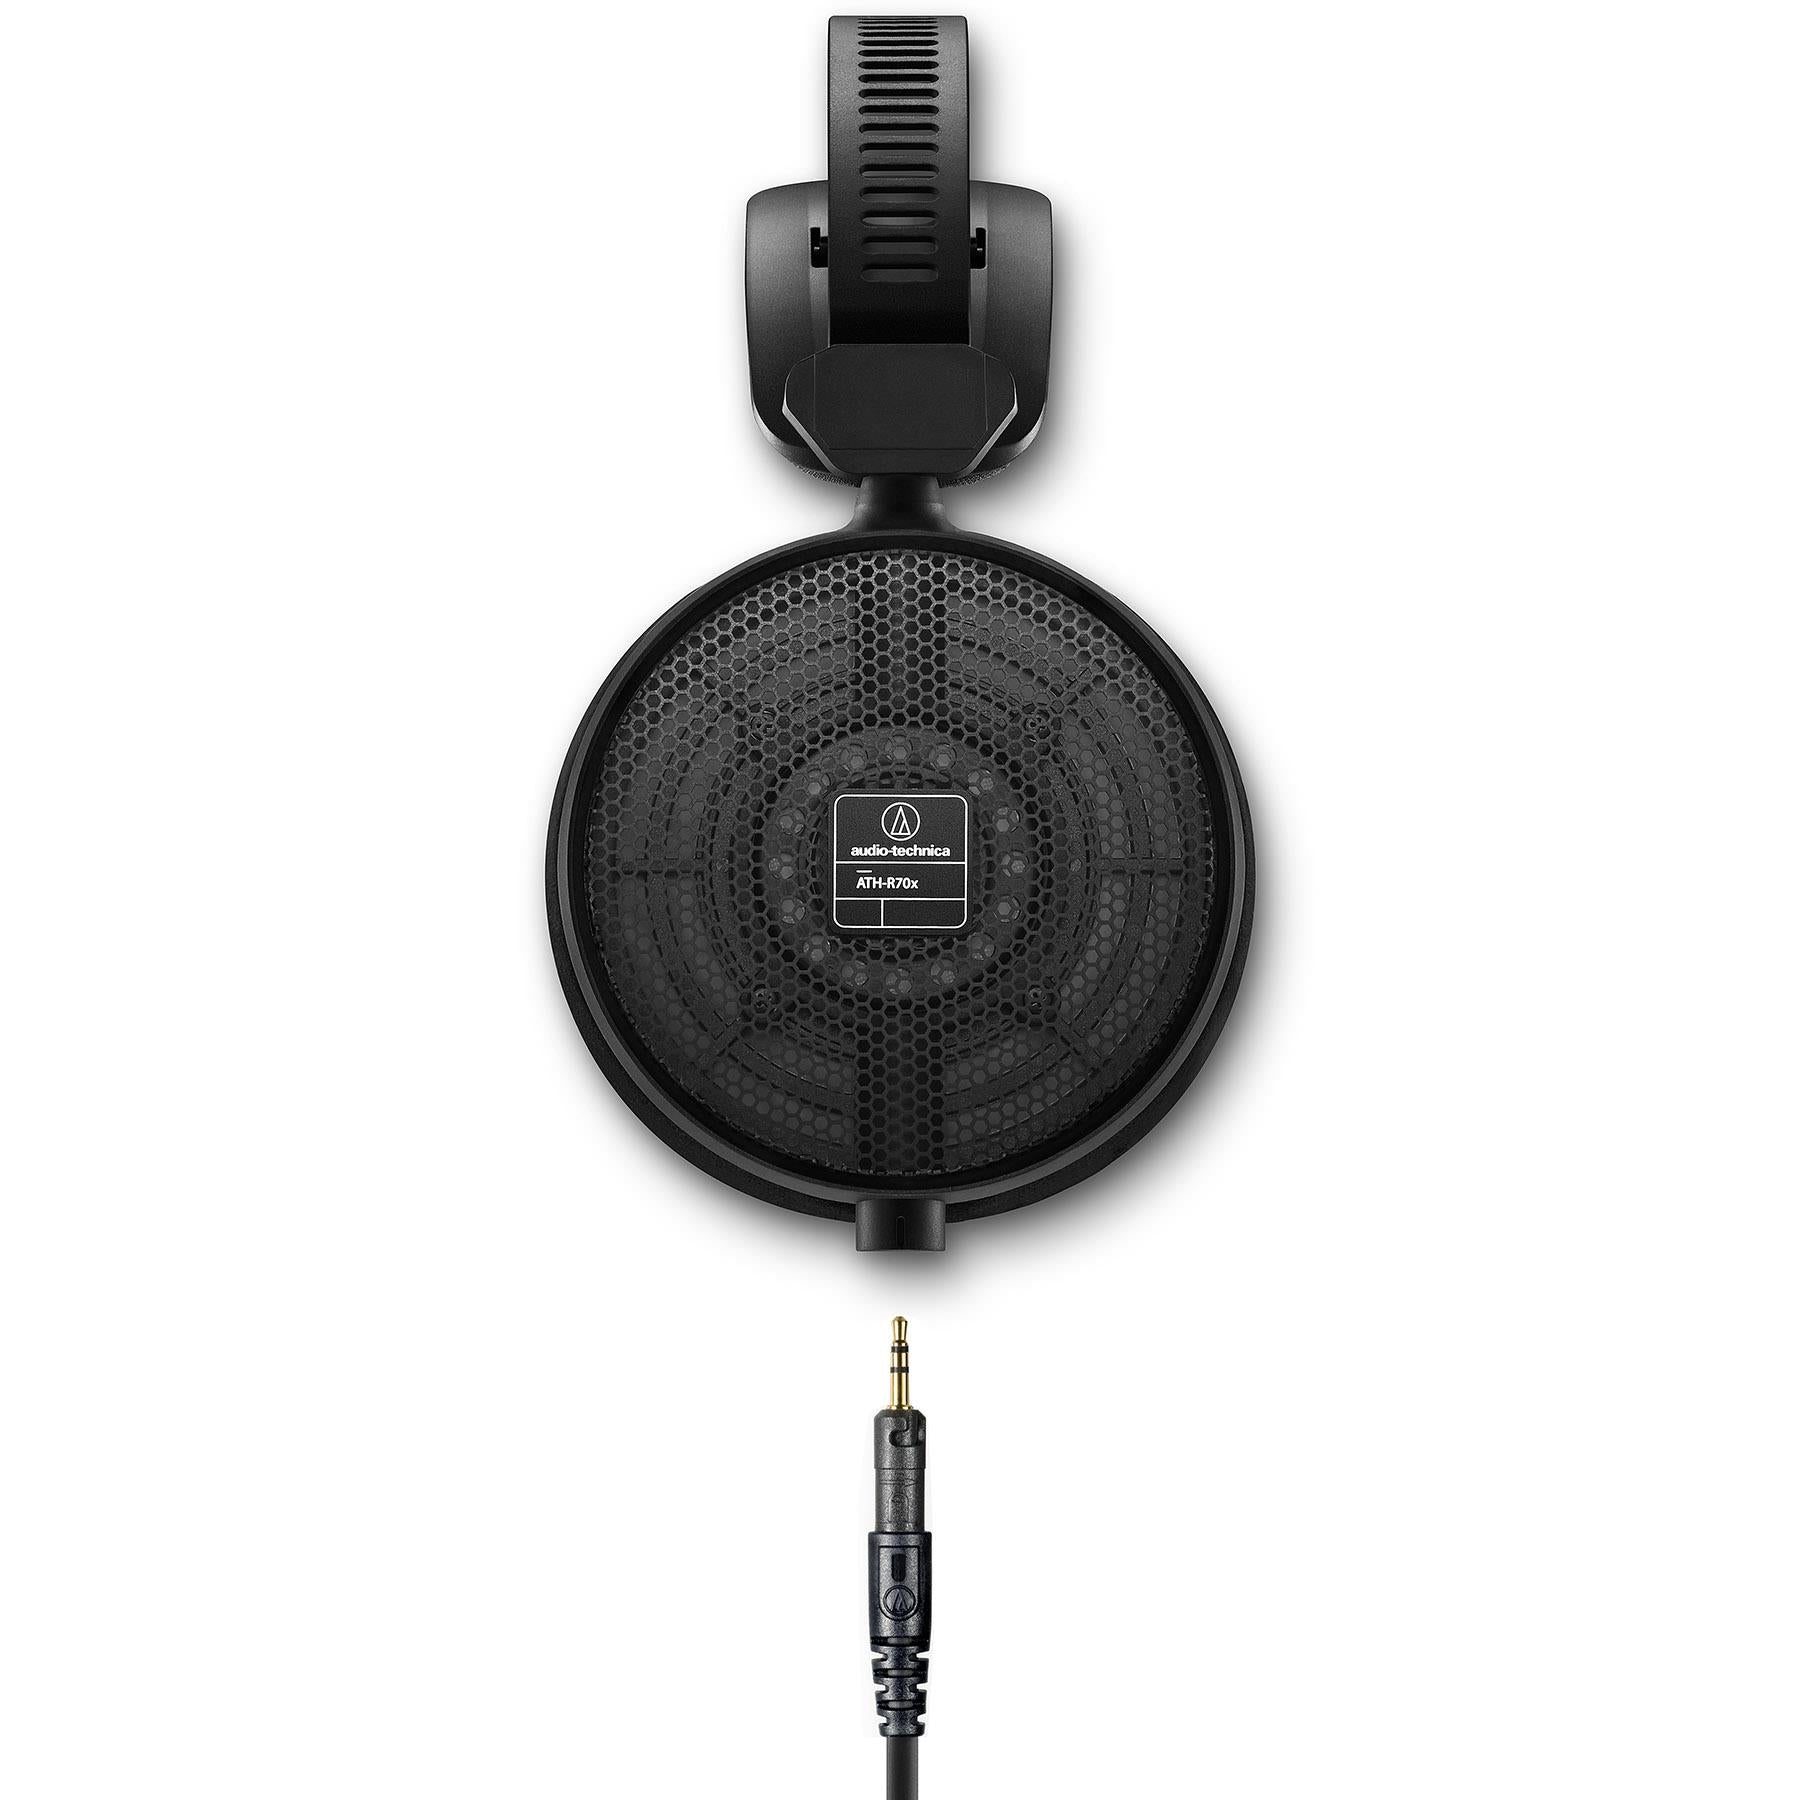 Audio-Technica ATH-R70x Open-Back On-Ear Reference Headphones